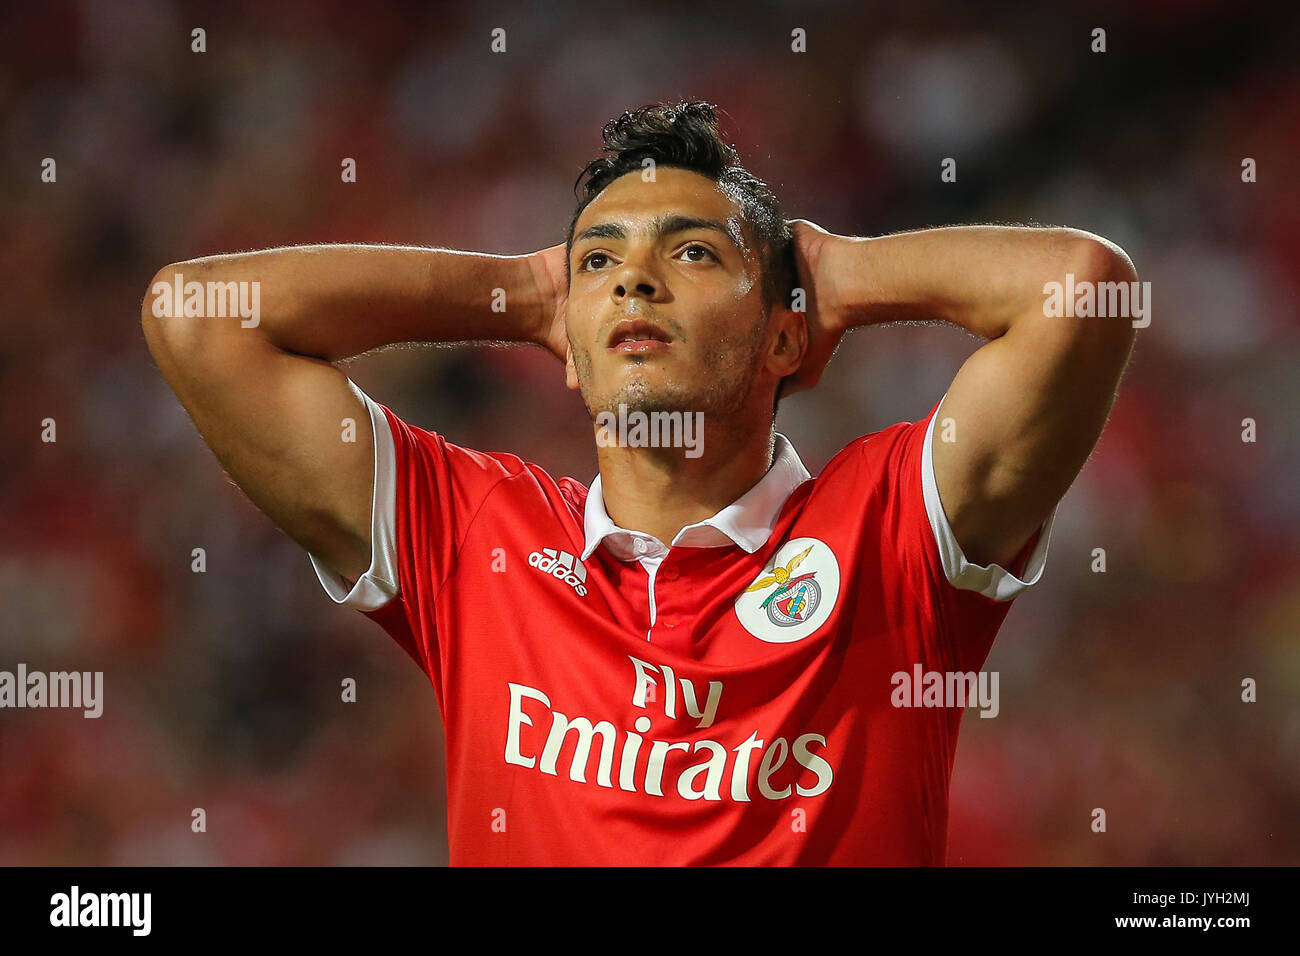 Lisbon, Portugal. 19th Aug, 2017. Benfica's forward Raul Jimenez from  Mexico during the Premier League 2017/18 match between SL Benfica v CF  Belenenses, at Luz Stadium in Lisbon on August 19, 2017.